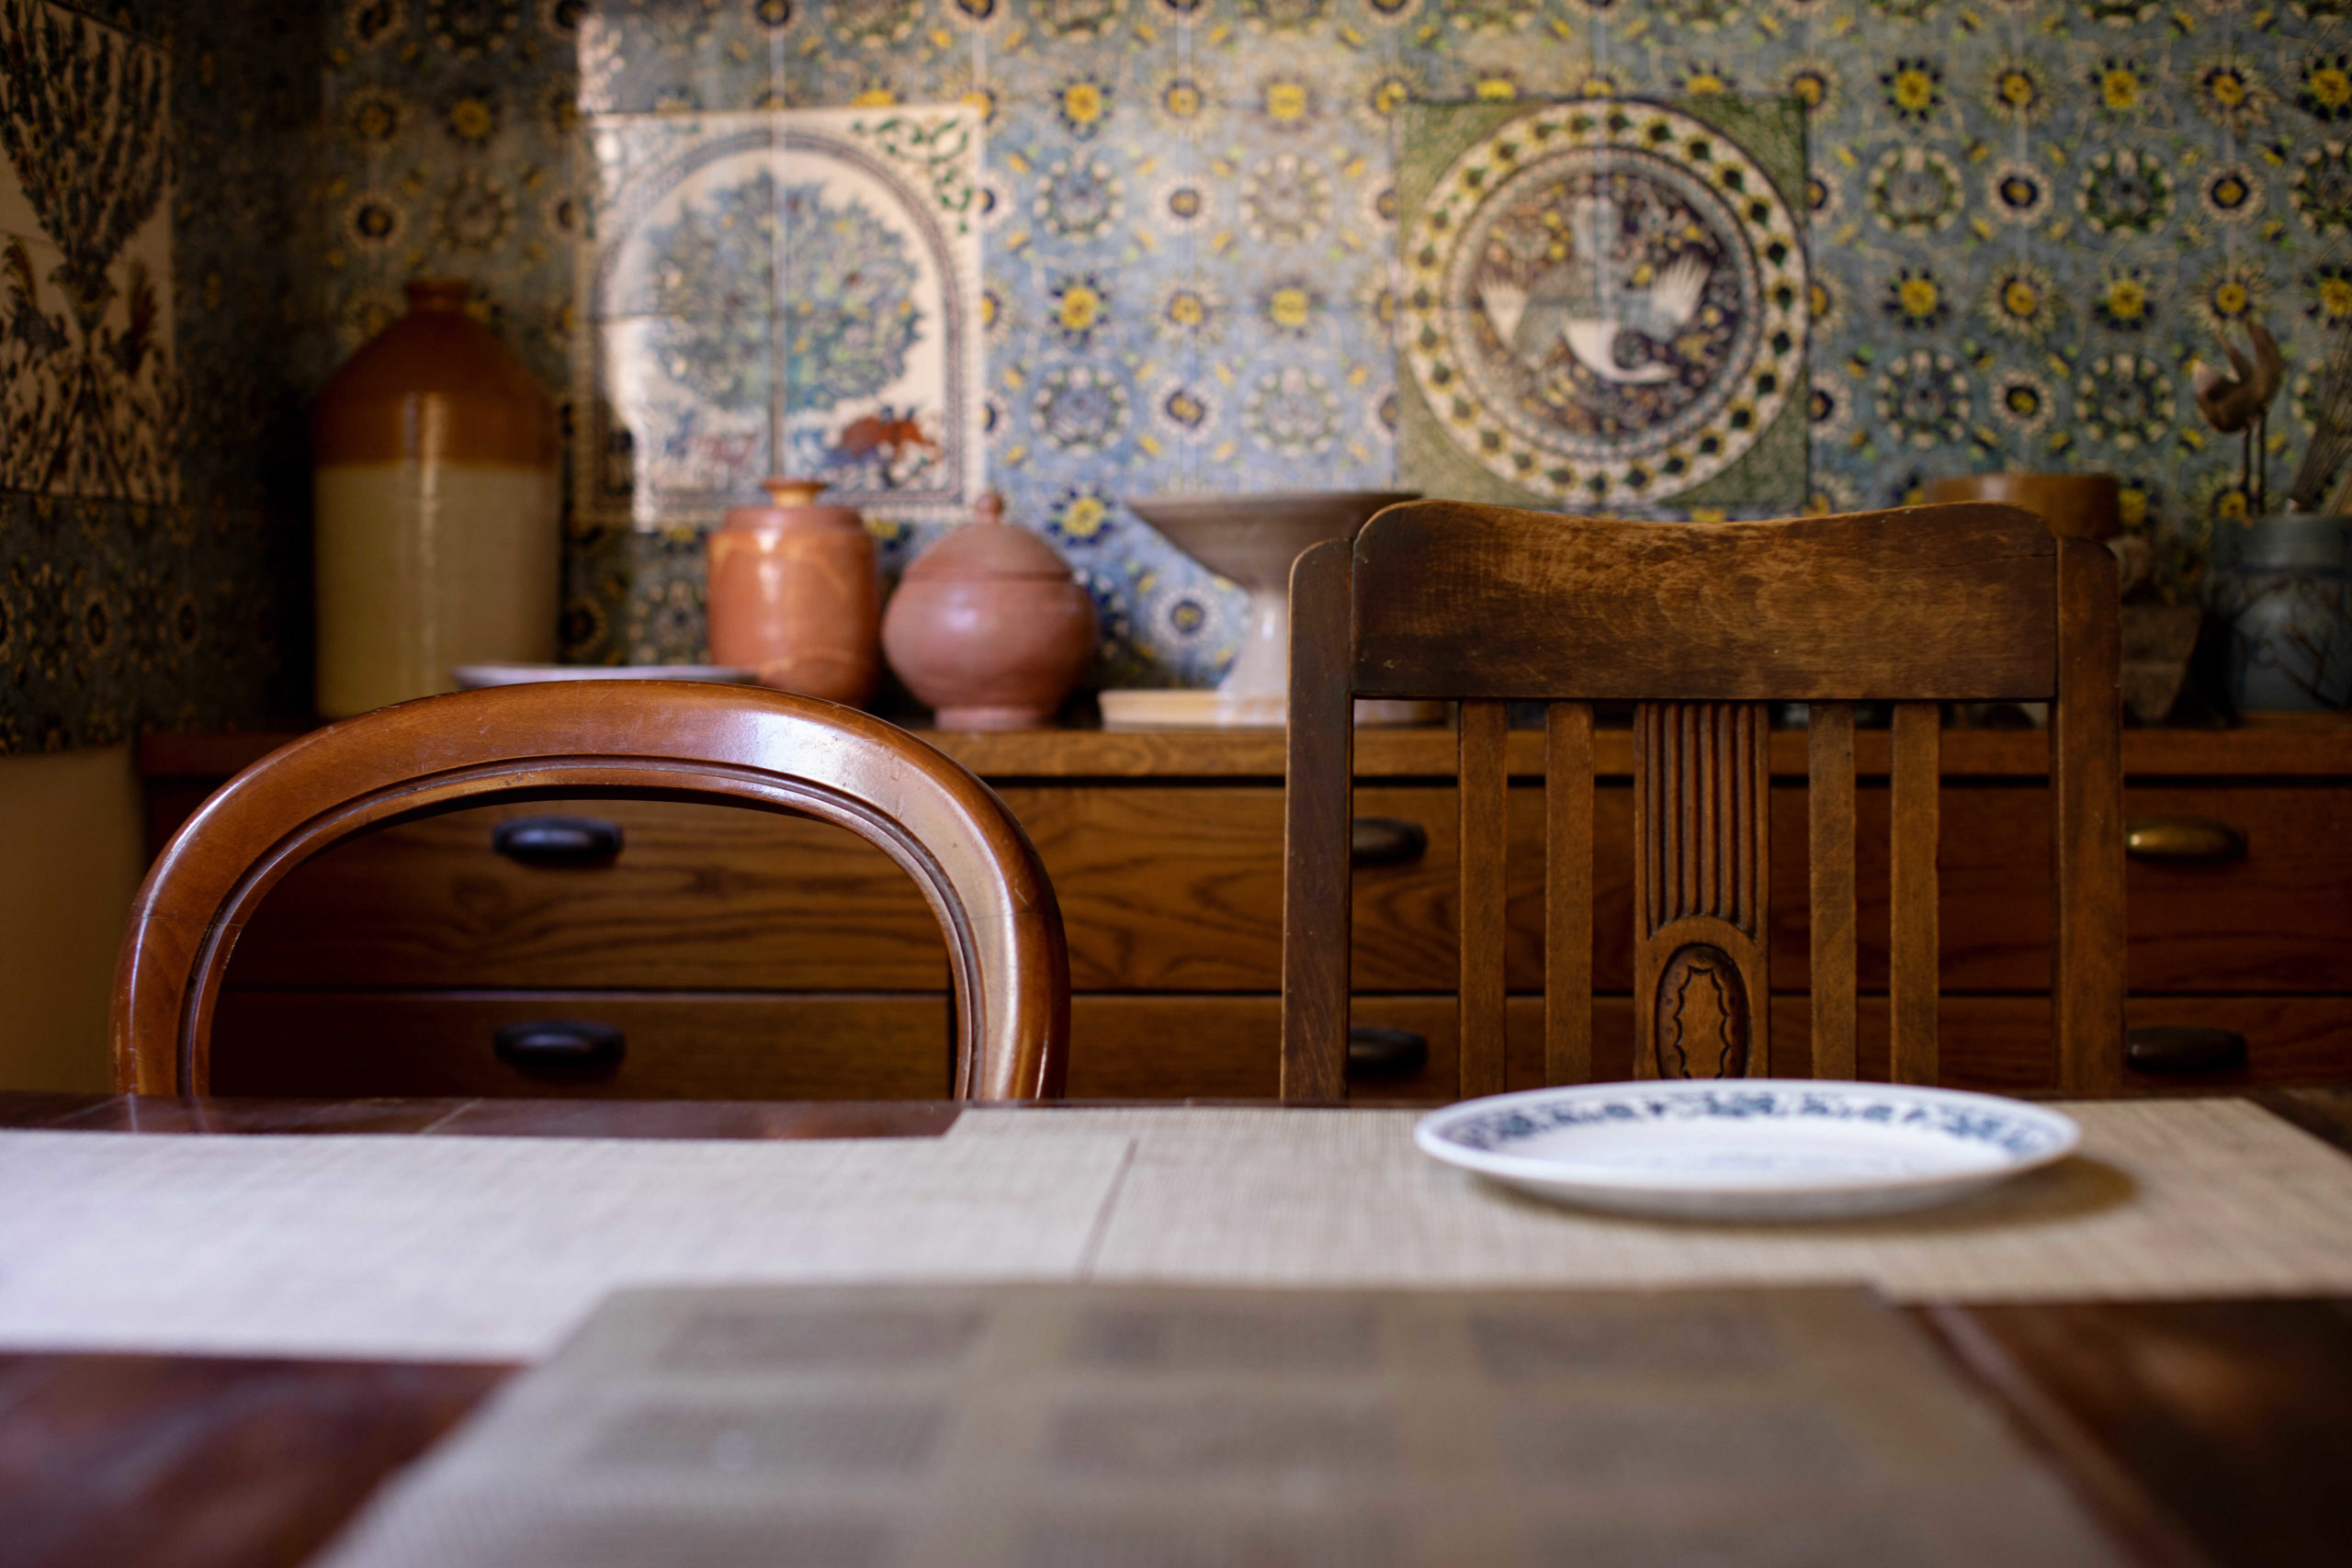 Nechama Rivlin's kitchen table with two chairs and blue and white tiles in the background